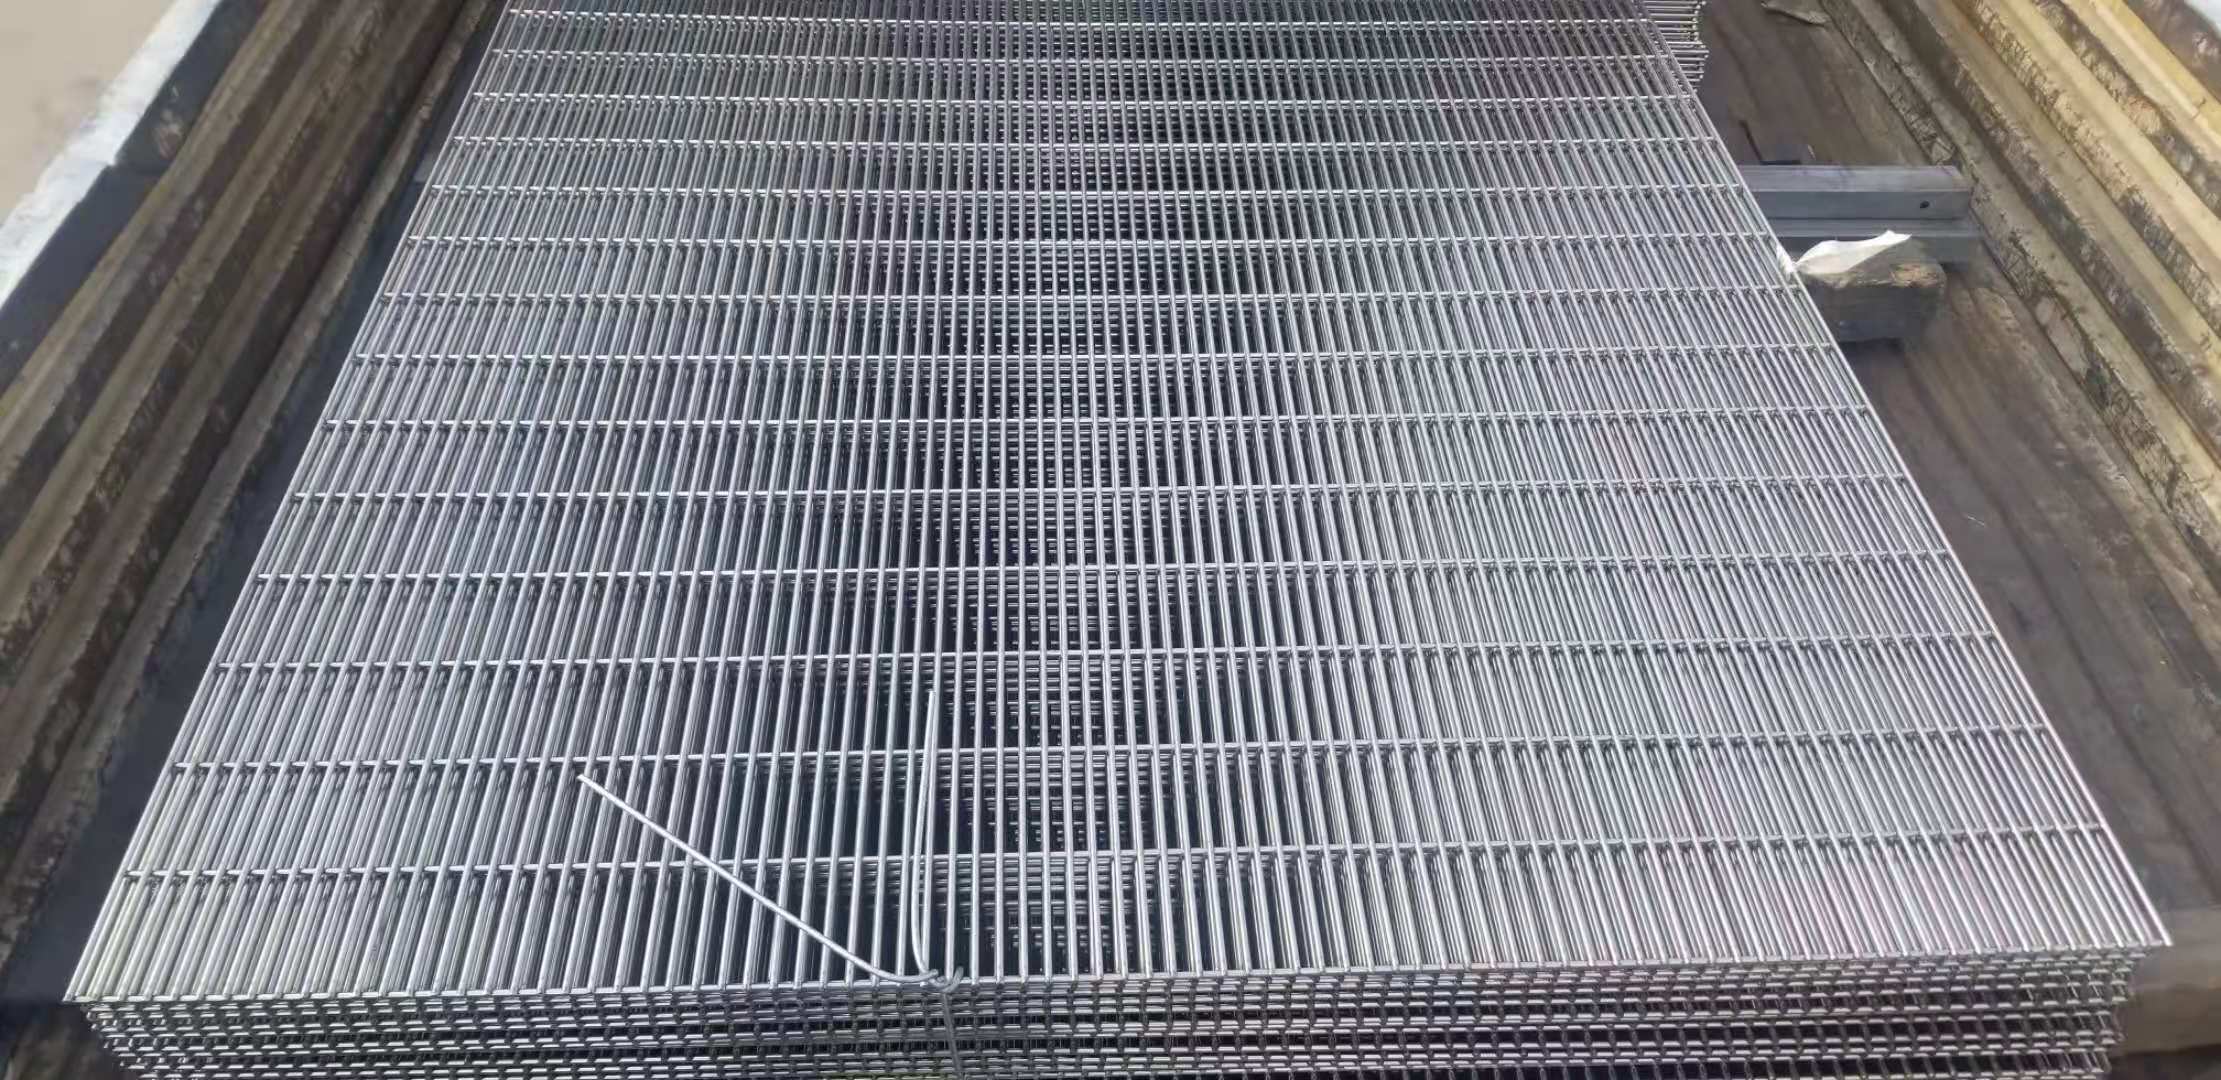 Stainless steel-high security fence